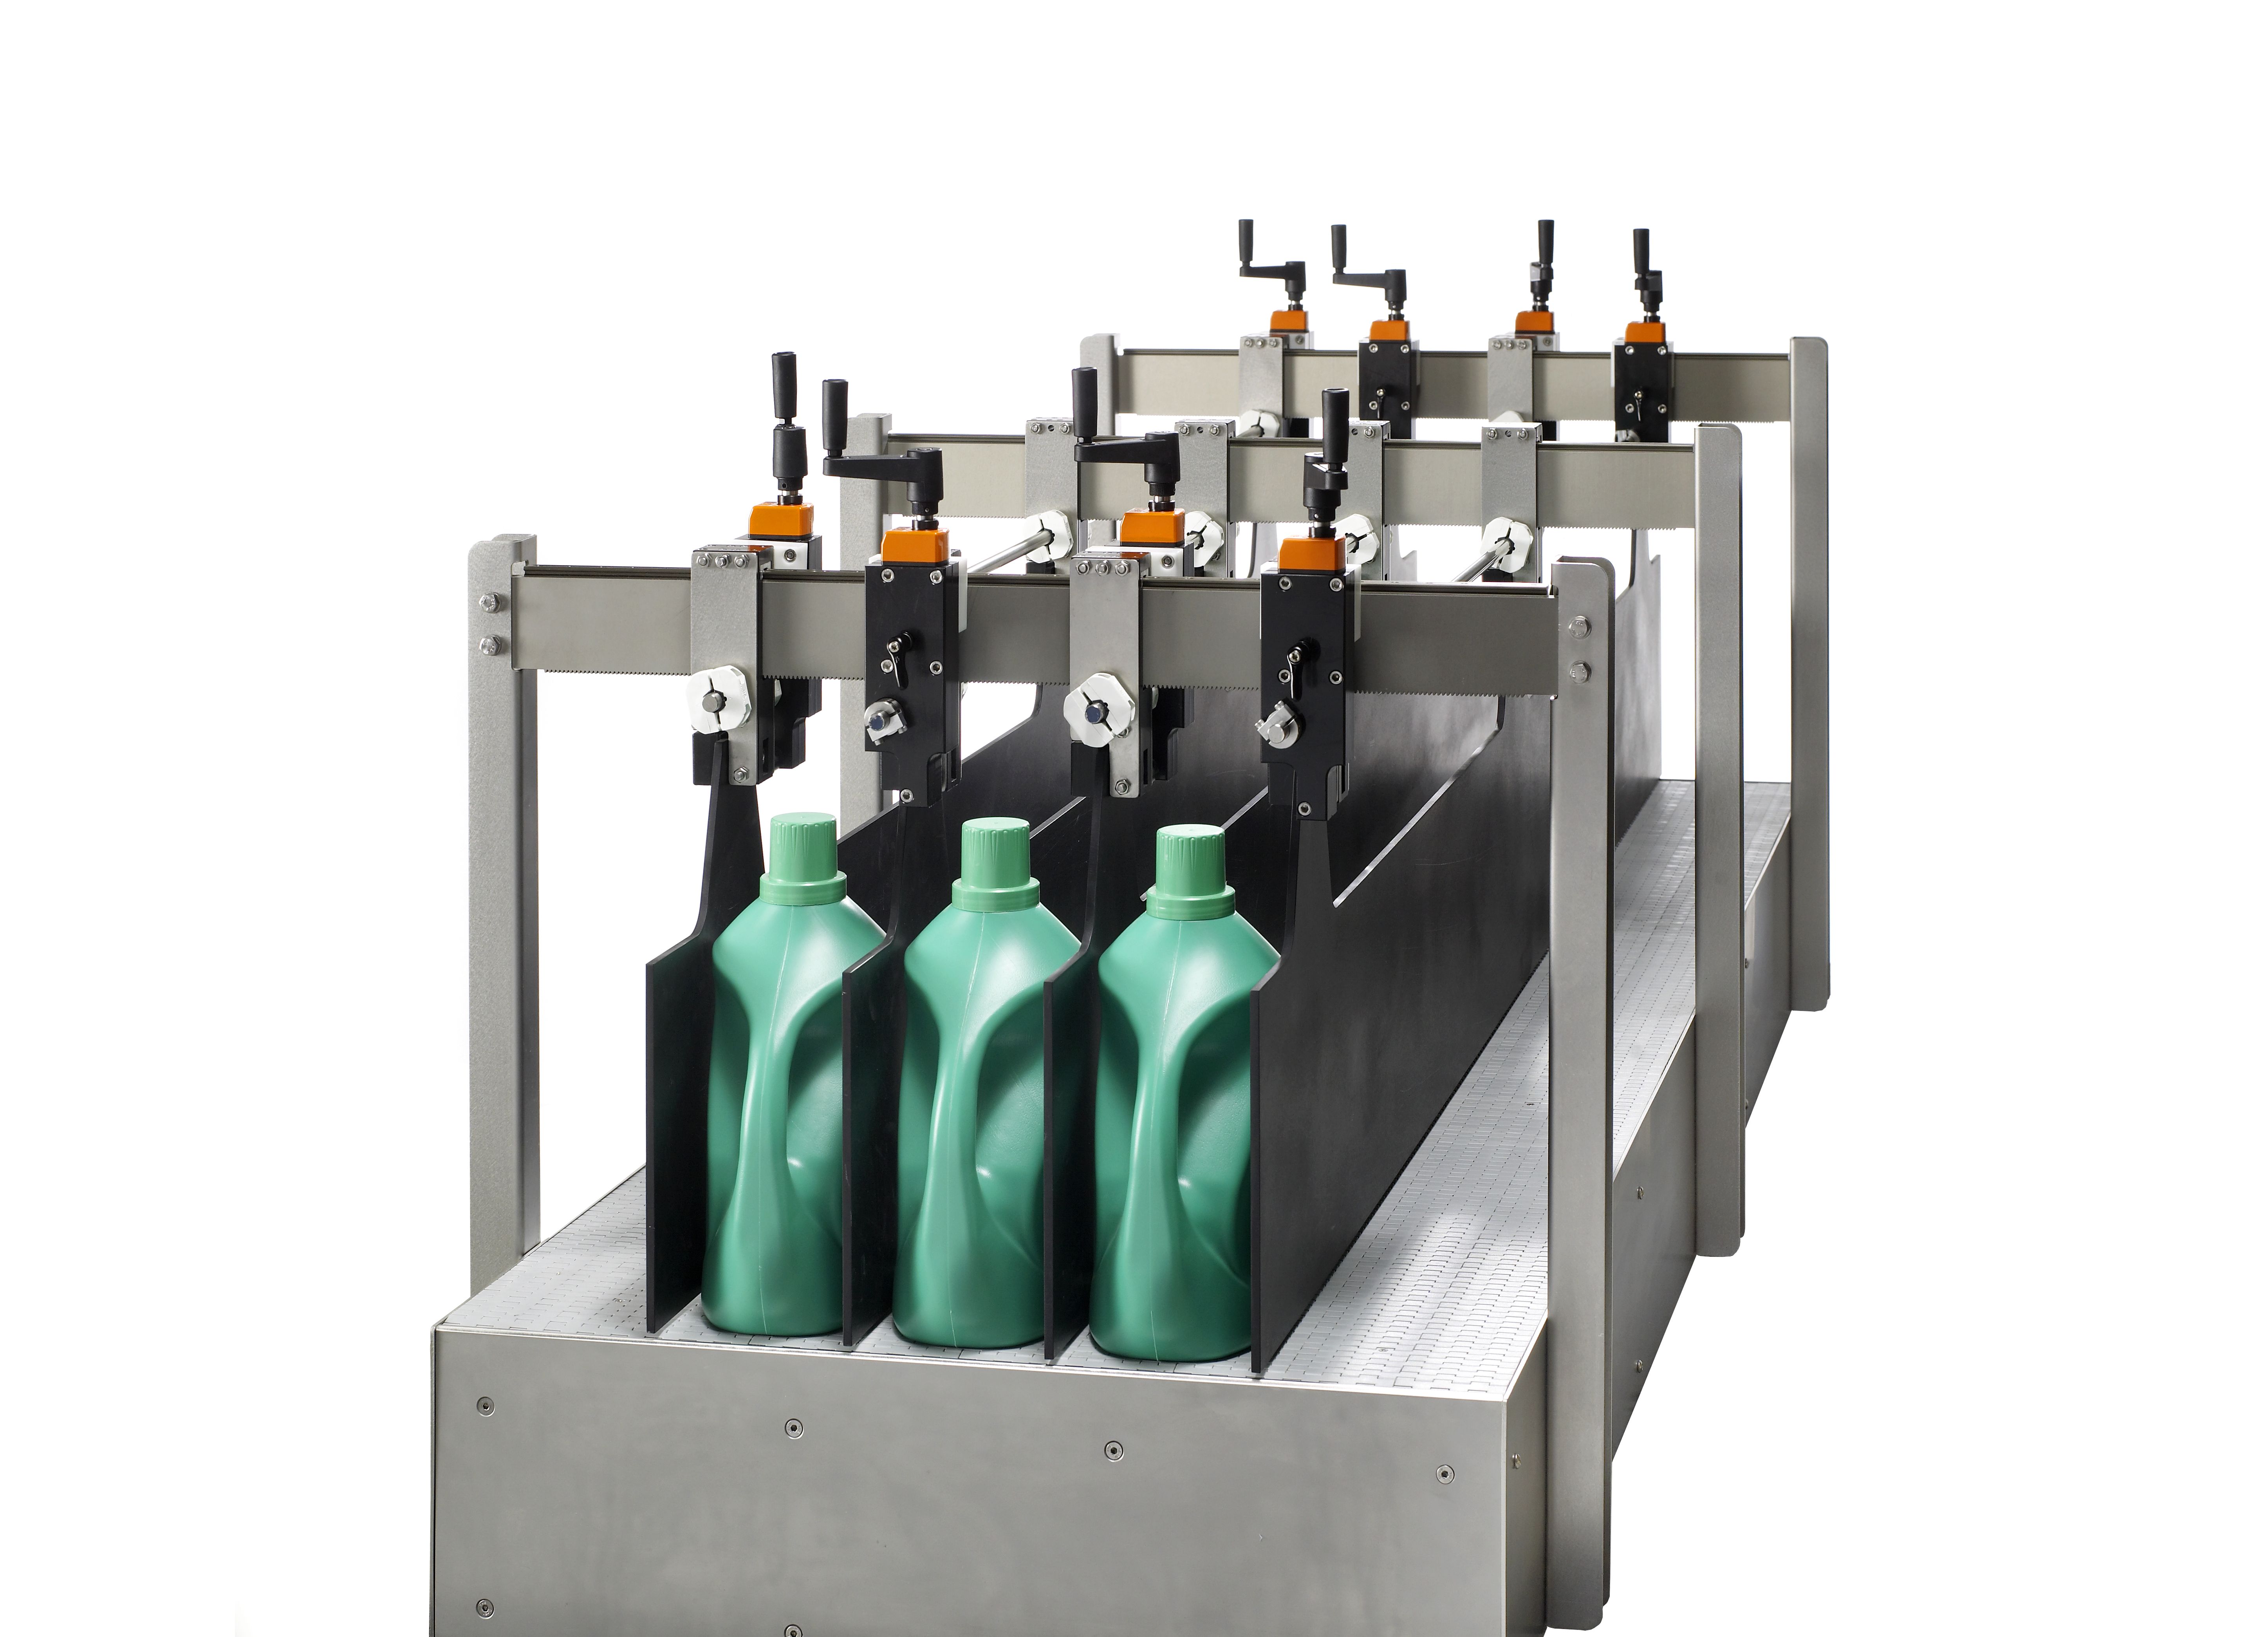 Multi-Lane Adjustment System allows customers to rapidly and simply adjust multiple packaging lanes.